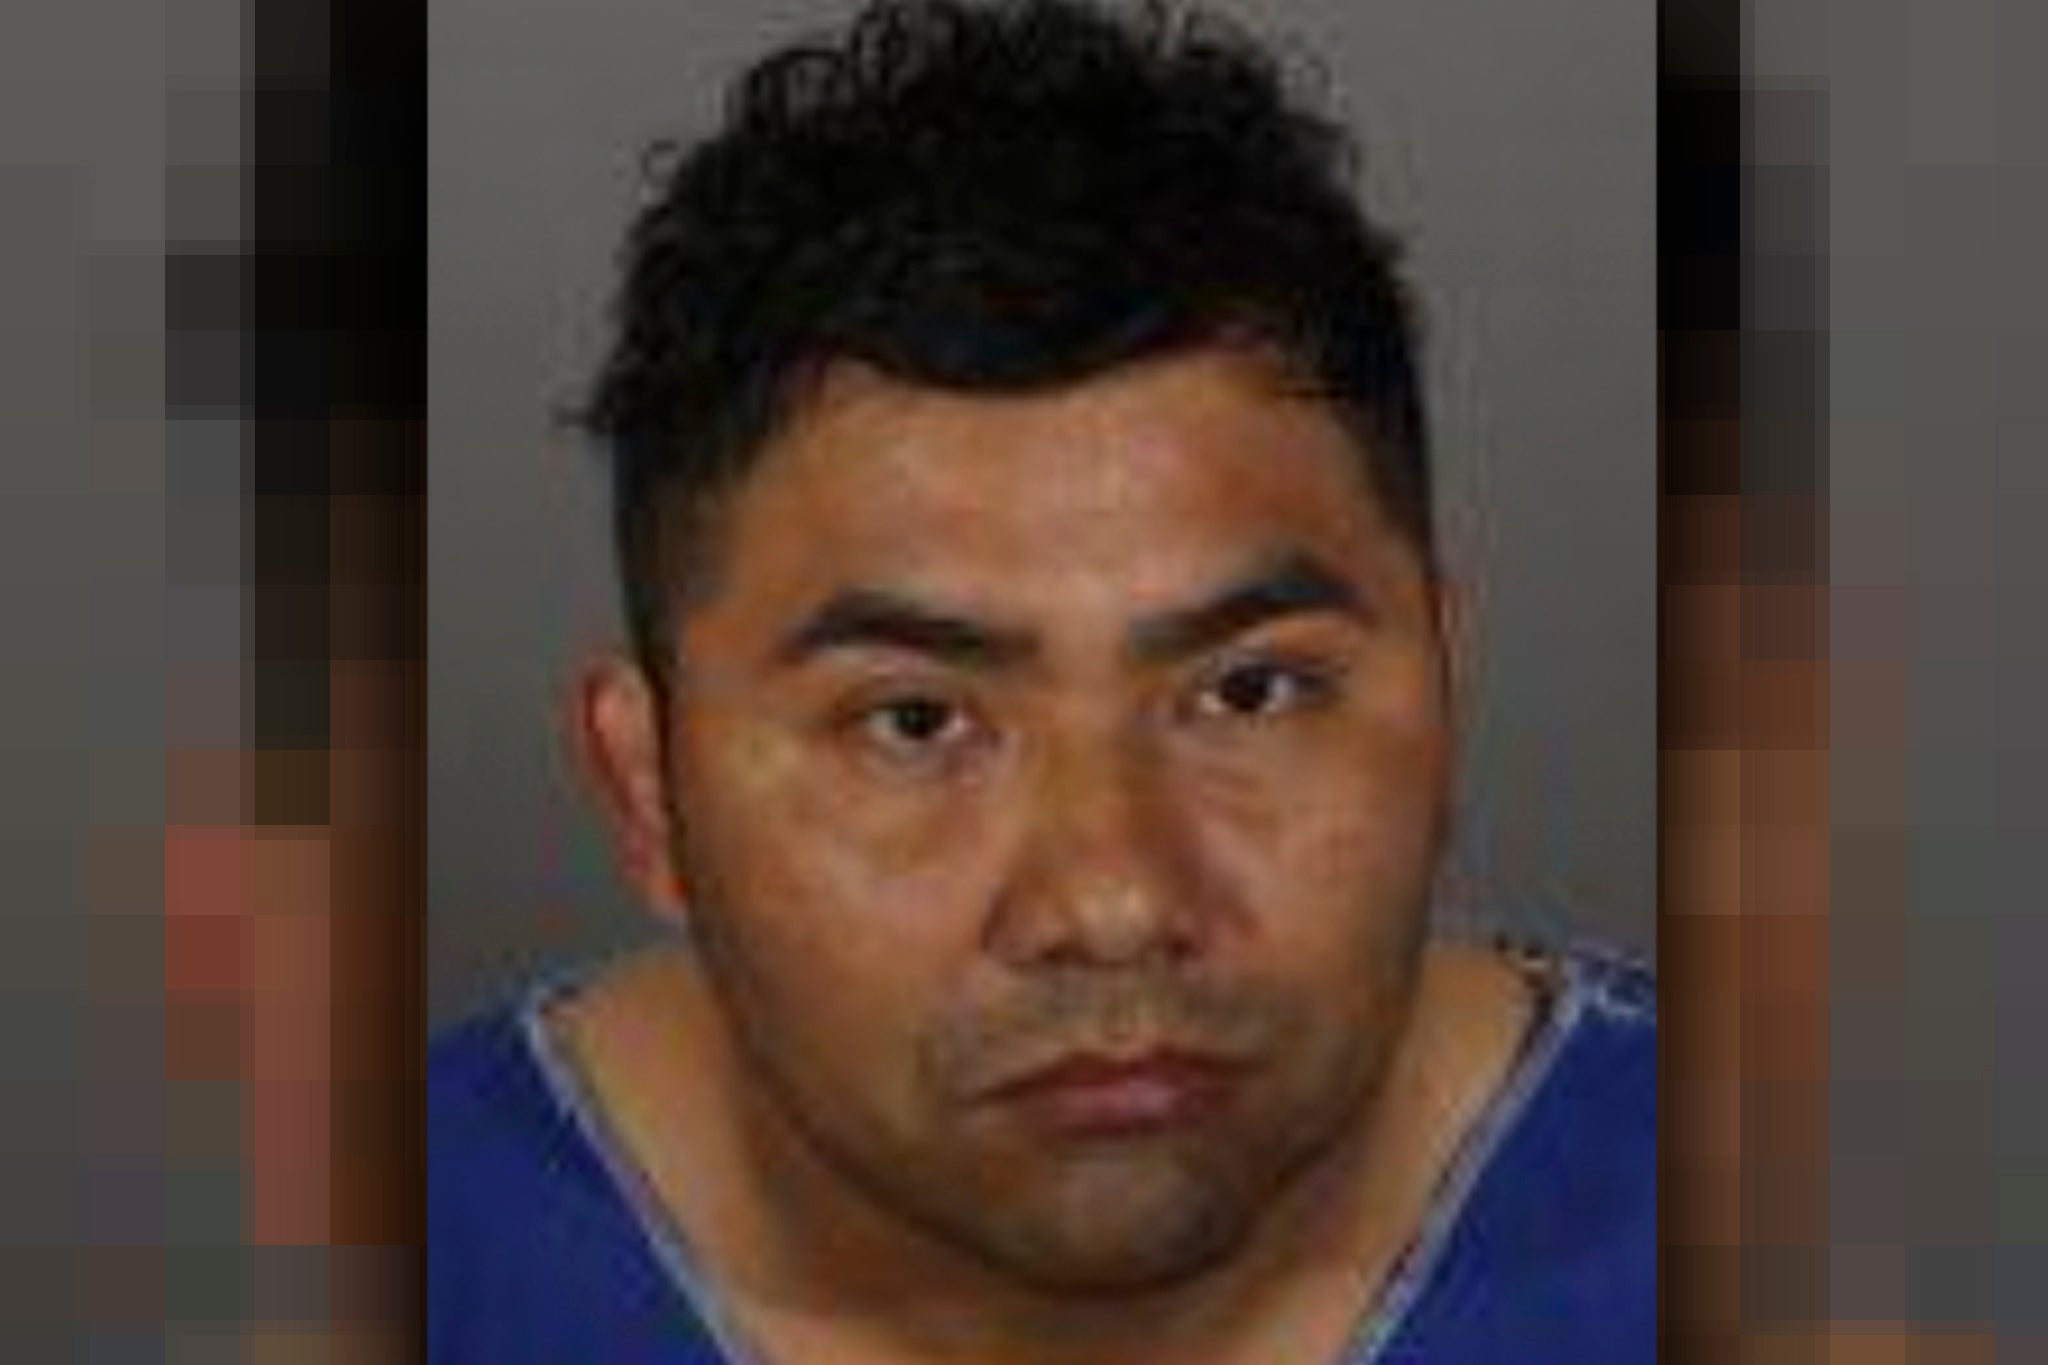 Eduardo Sarabia, pictured in a booking photo, was arrested on Monday